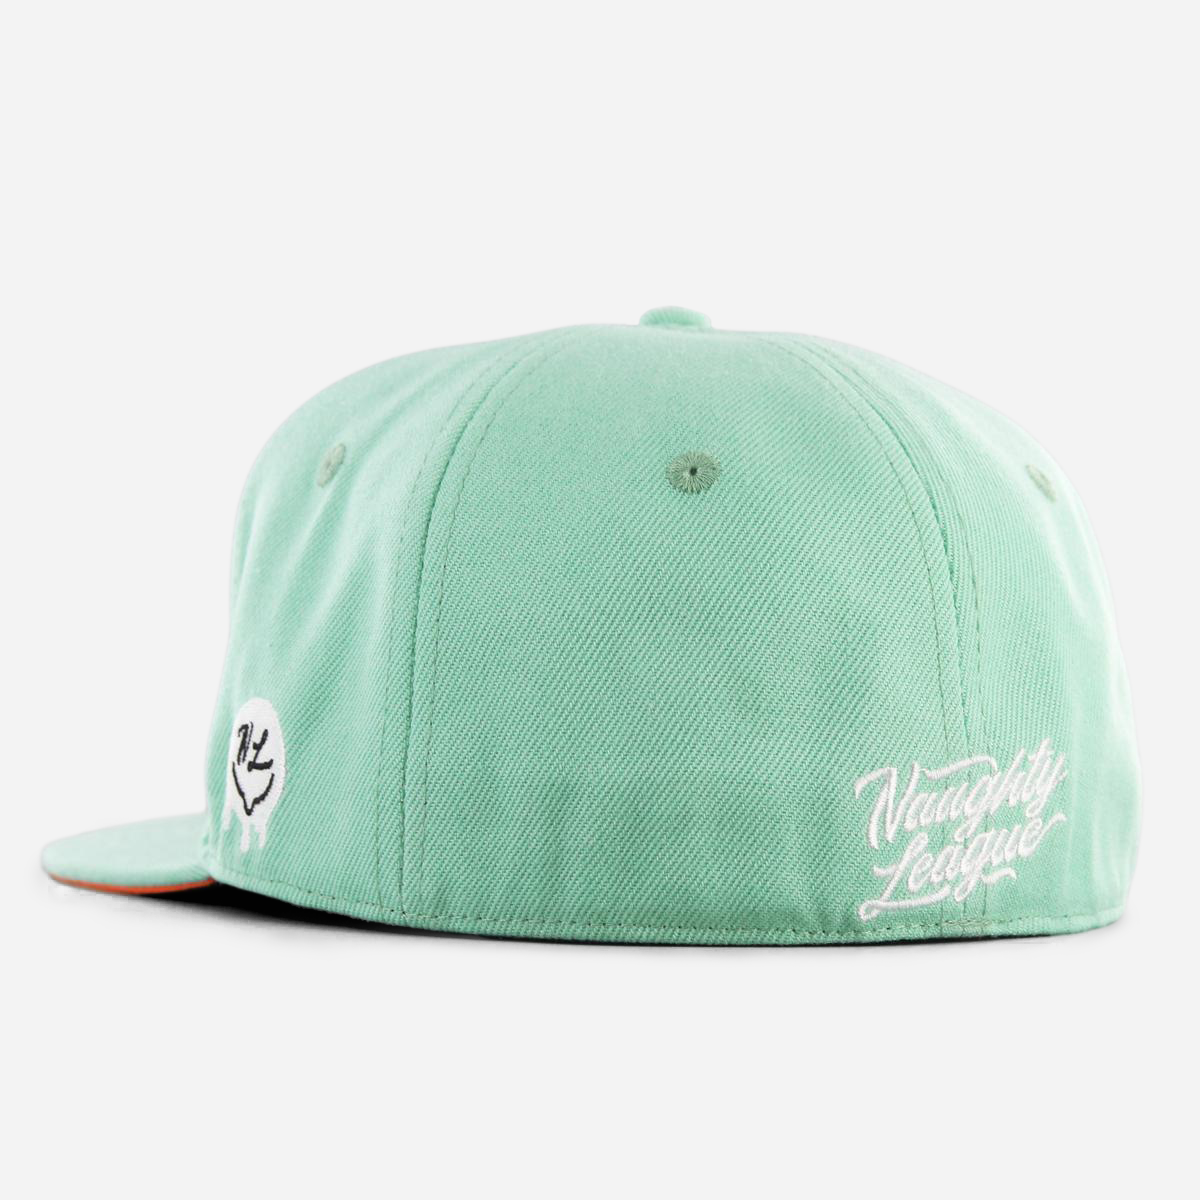 Los Angeles Dope Heads Fitted Aqua